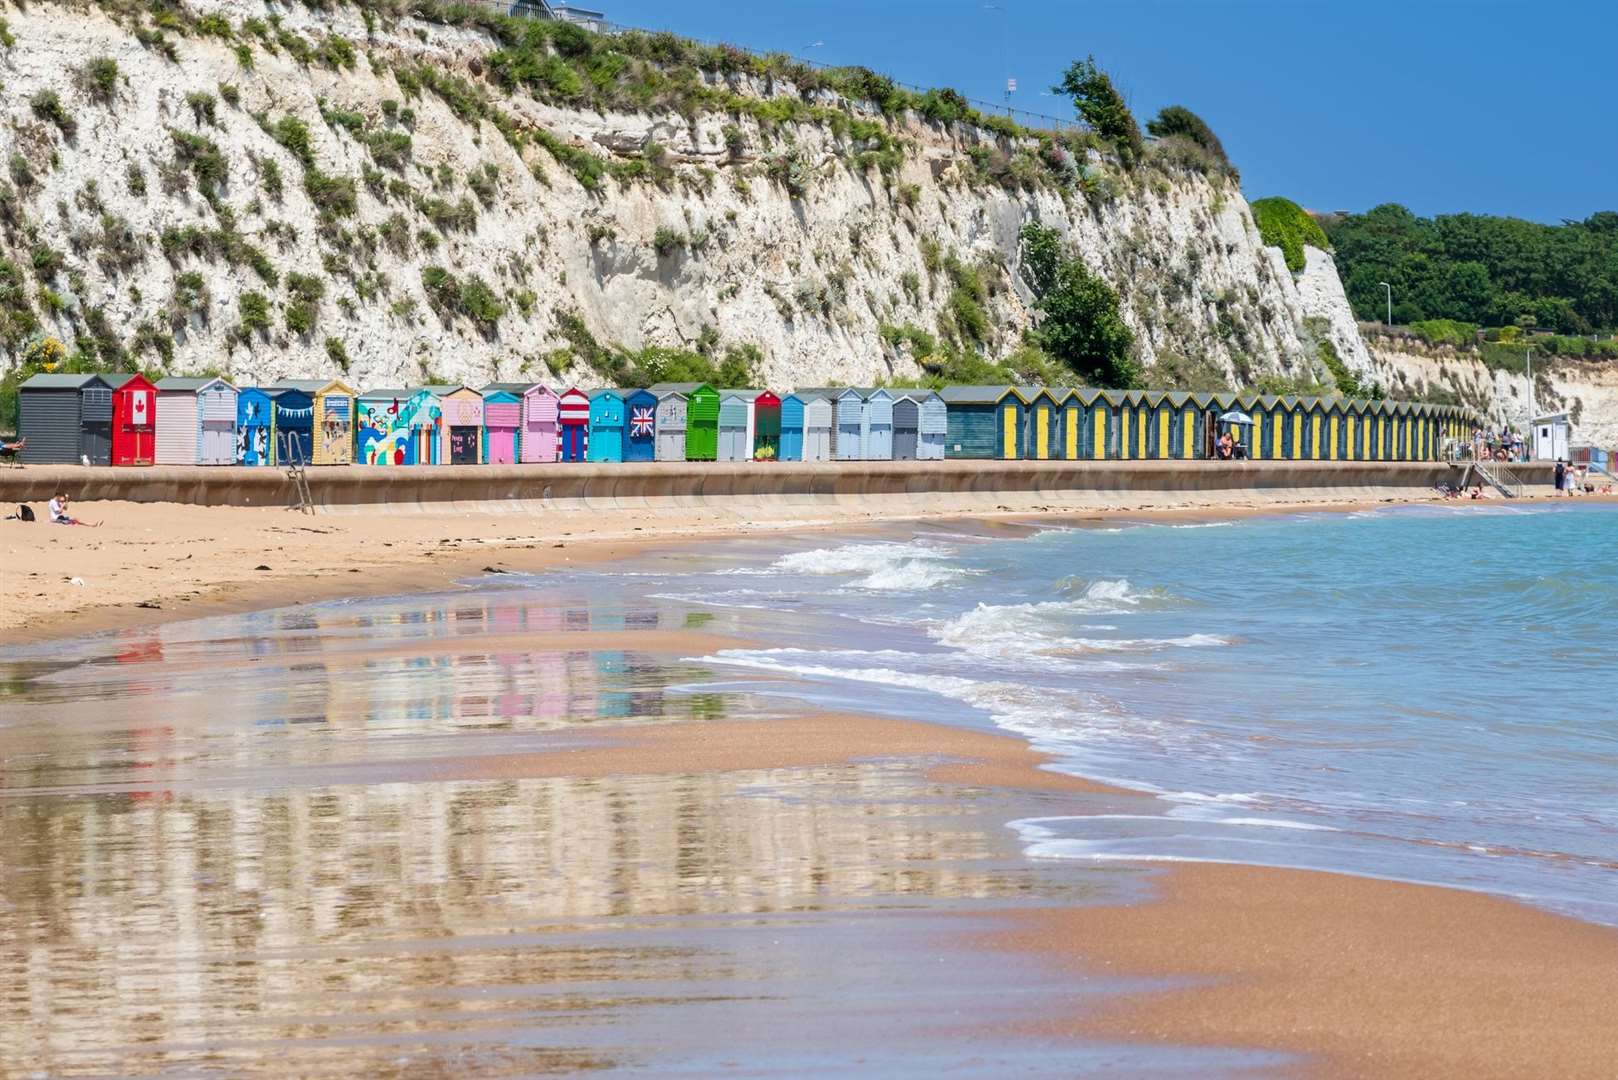 Beach huts and the sandy beach at Stone Bay, Broadstairs